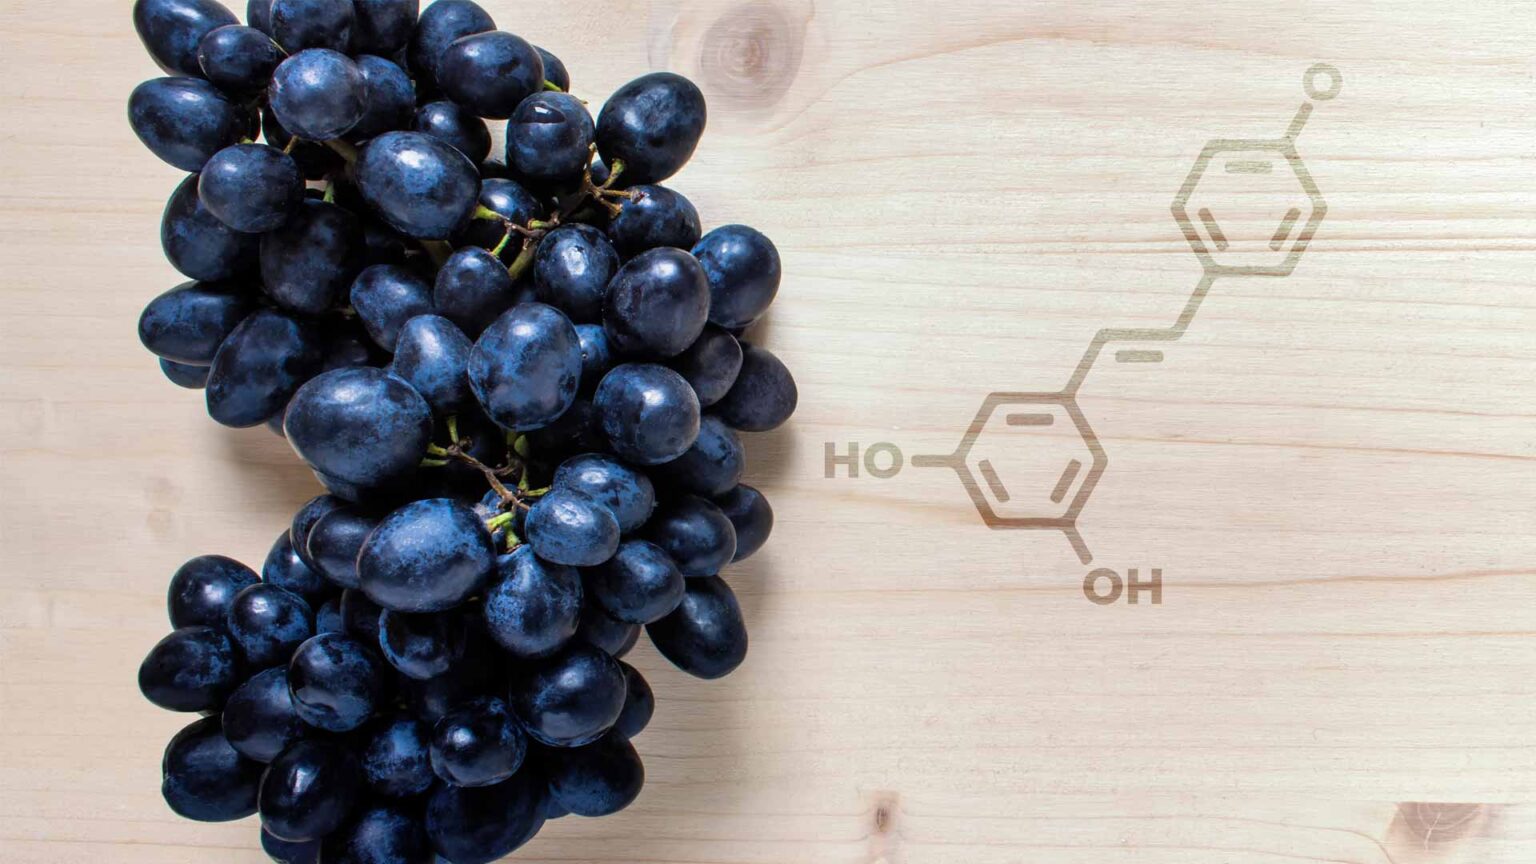 Dark skin grapes on a wood board with the molecular structure of resveratrol laser-etched into the surface.